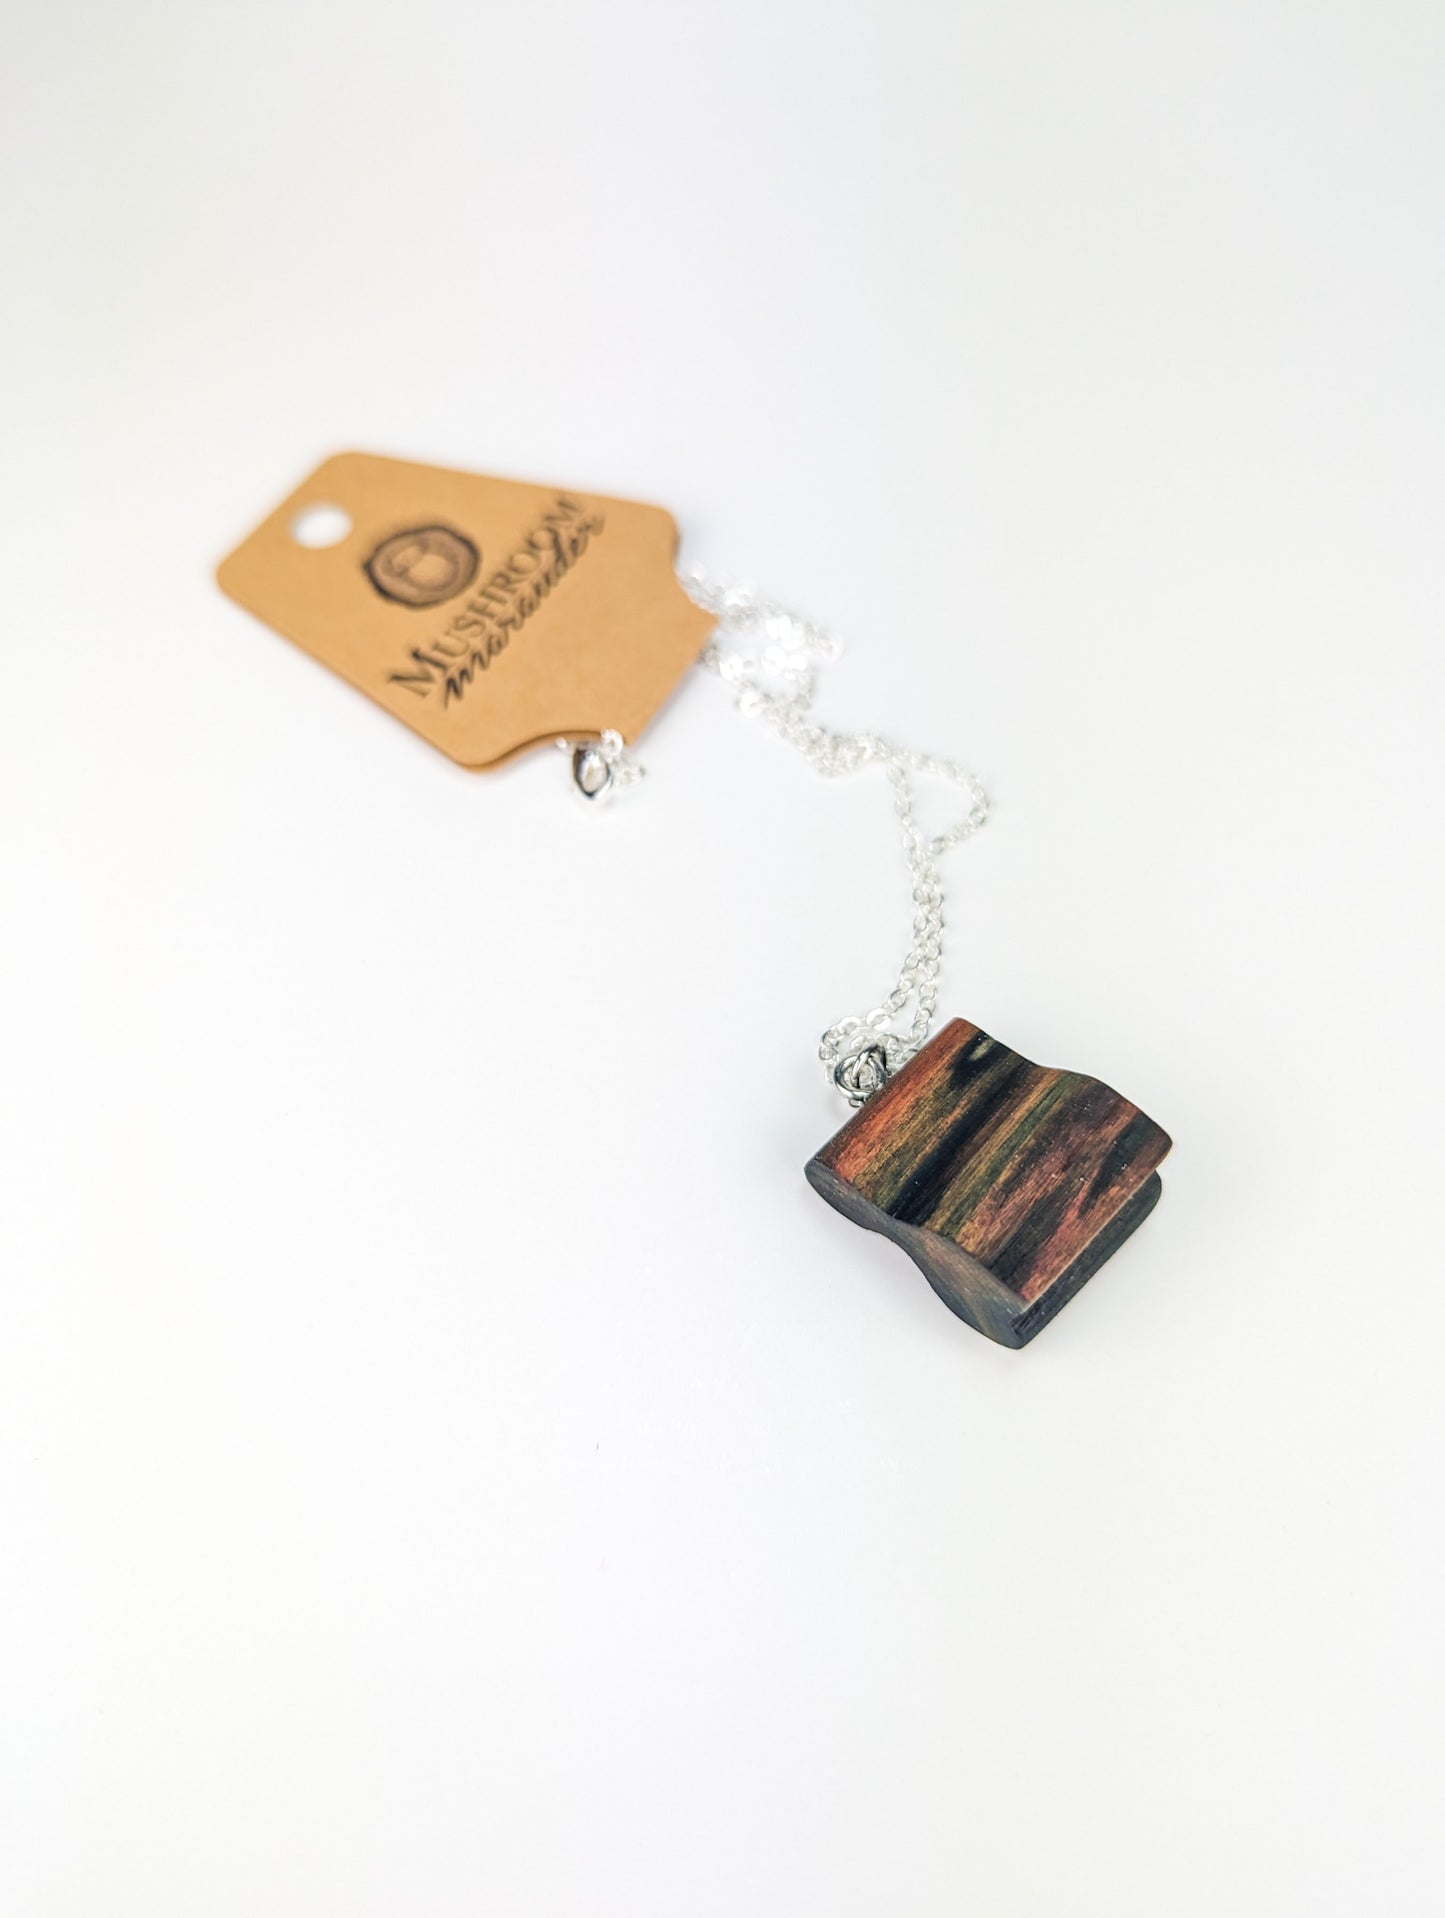 Naturally Fungus-Stained Wooden Pendant | Abstract Chunk #2